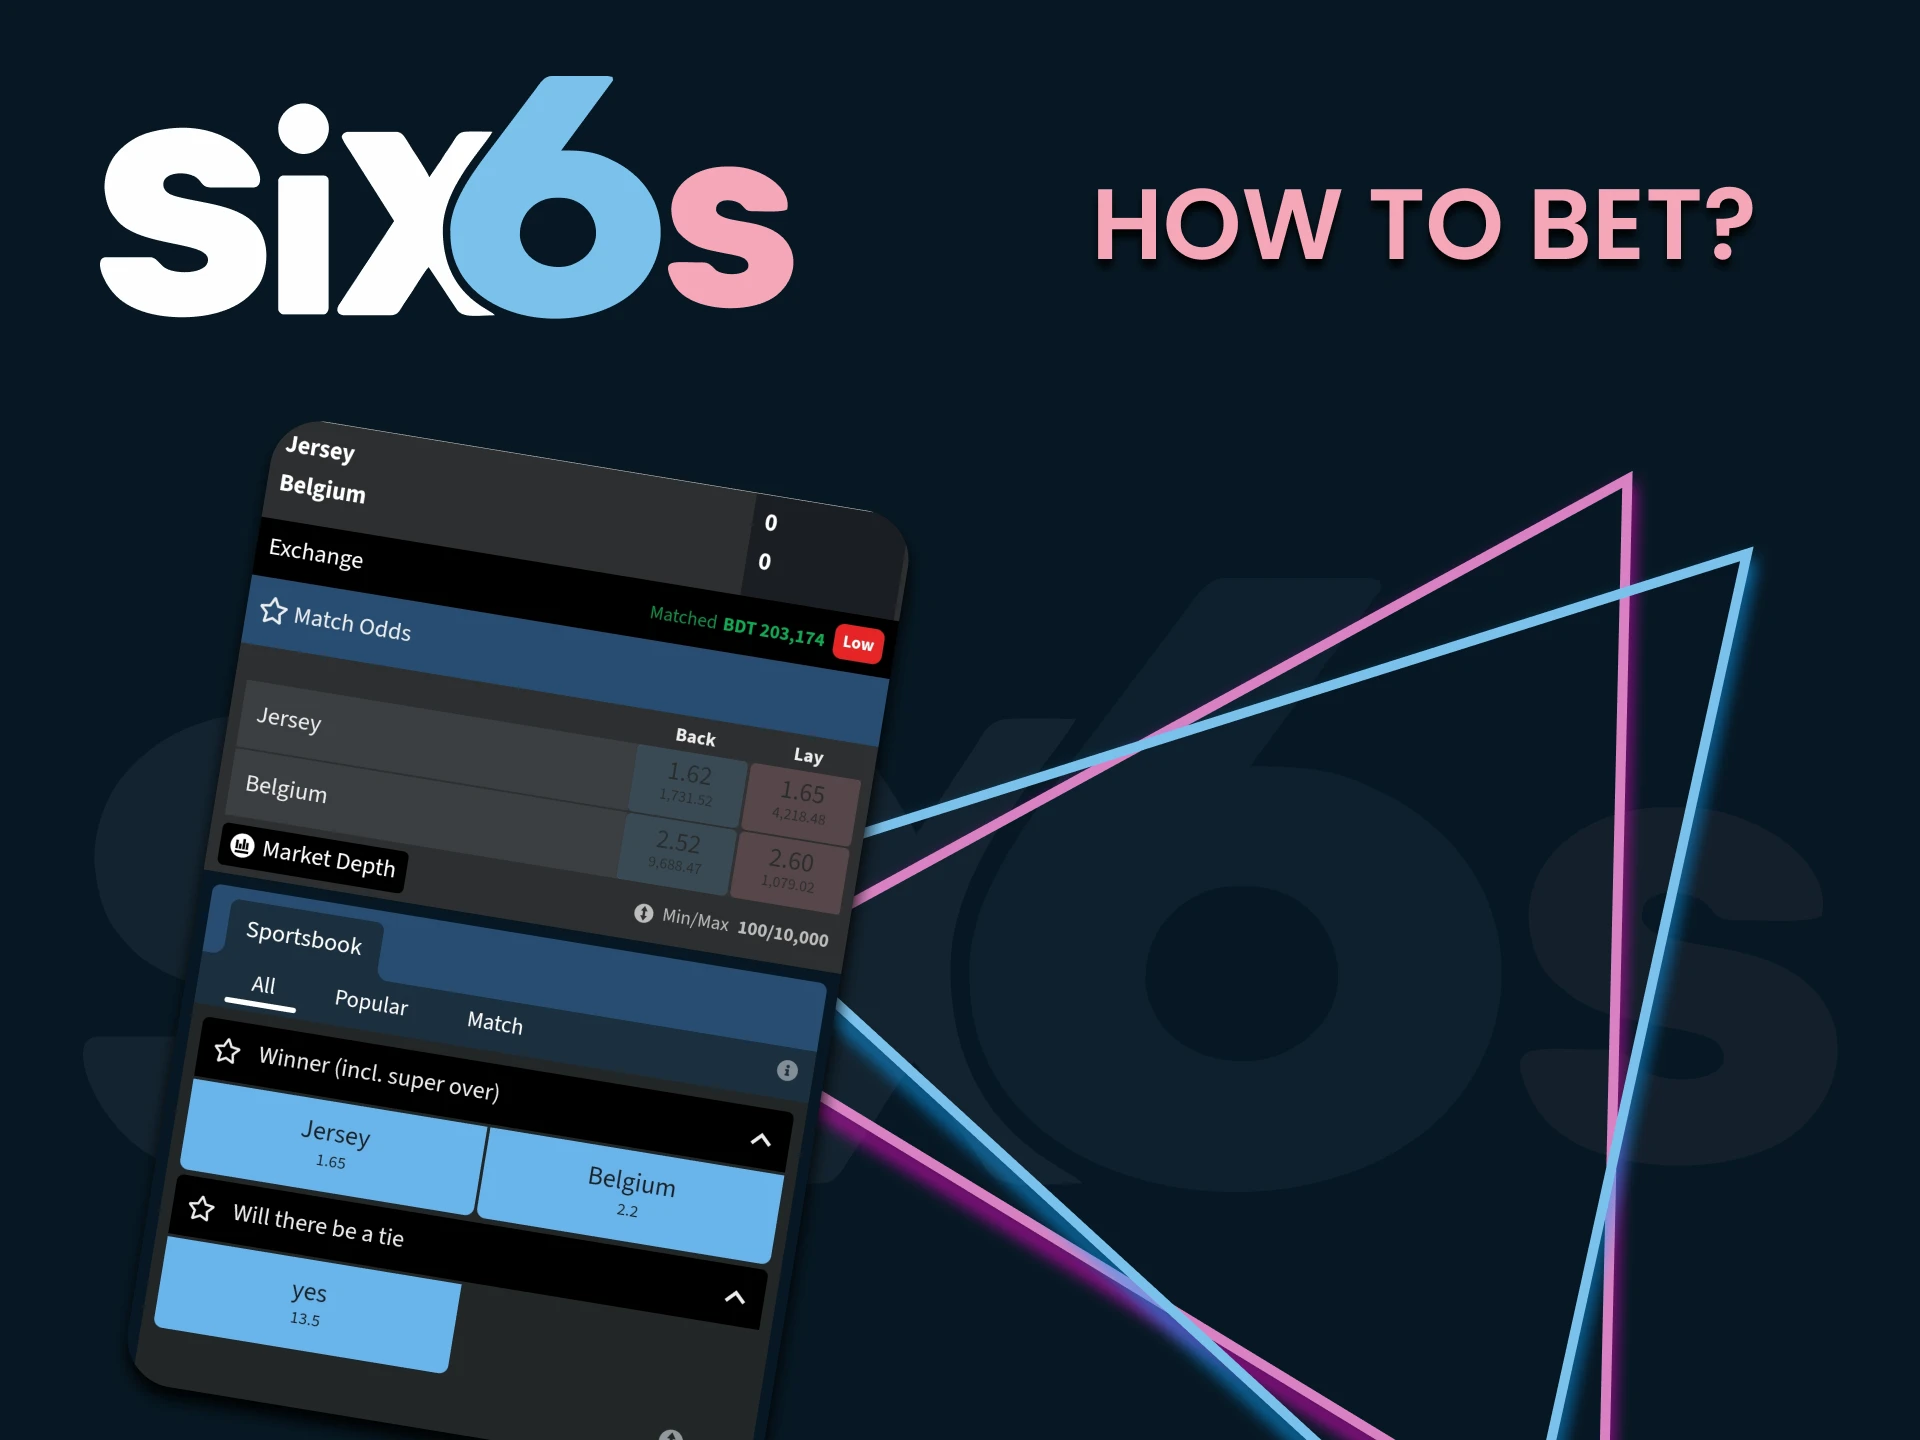 We will tell you how to start betting on cricket with Six6s.